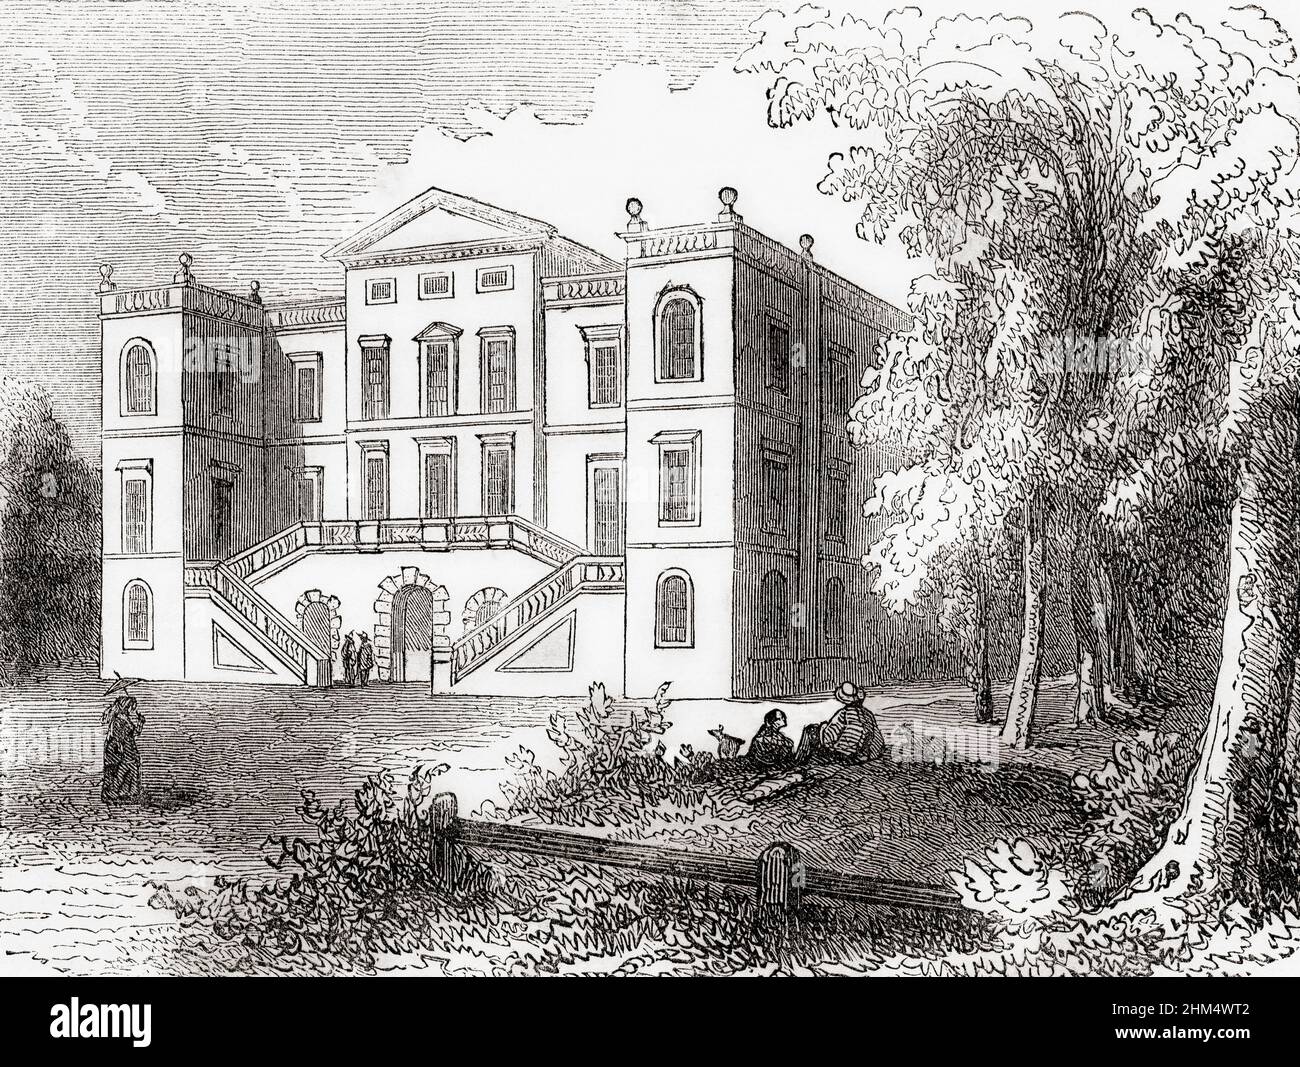 Pope's villa, residence of Alexander Pope at Twickenham, London, England, seen here in the 19th century.  Alexander Pope, 1688 –1744. English poet, translator, and satirist of the Augustan period. From Cassell's Illustrated History of England, published c.1890. Stock Photo